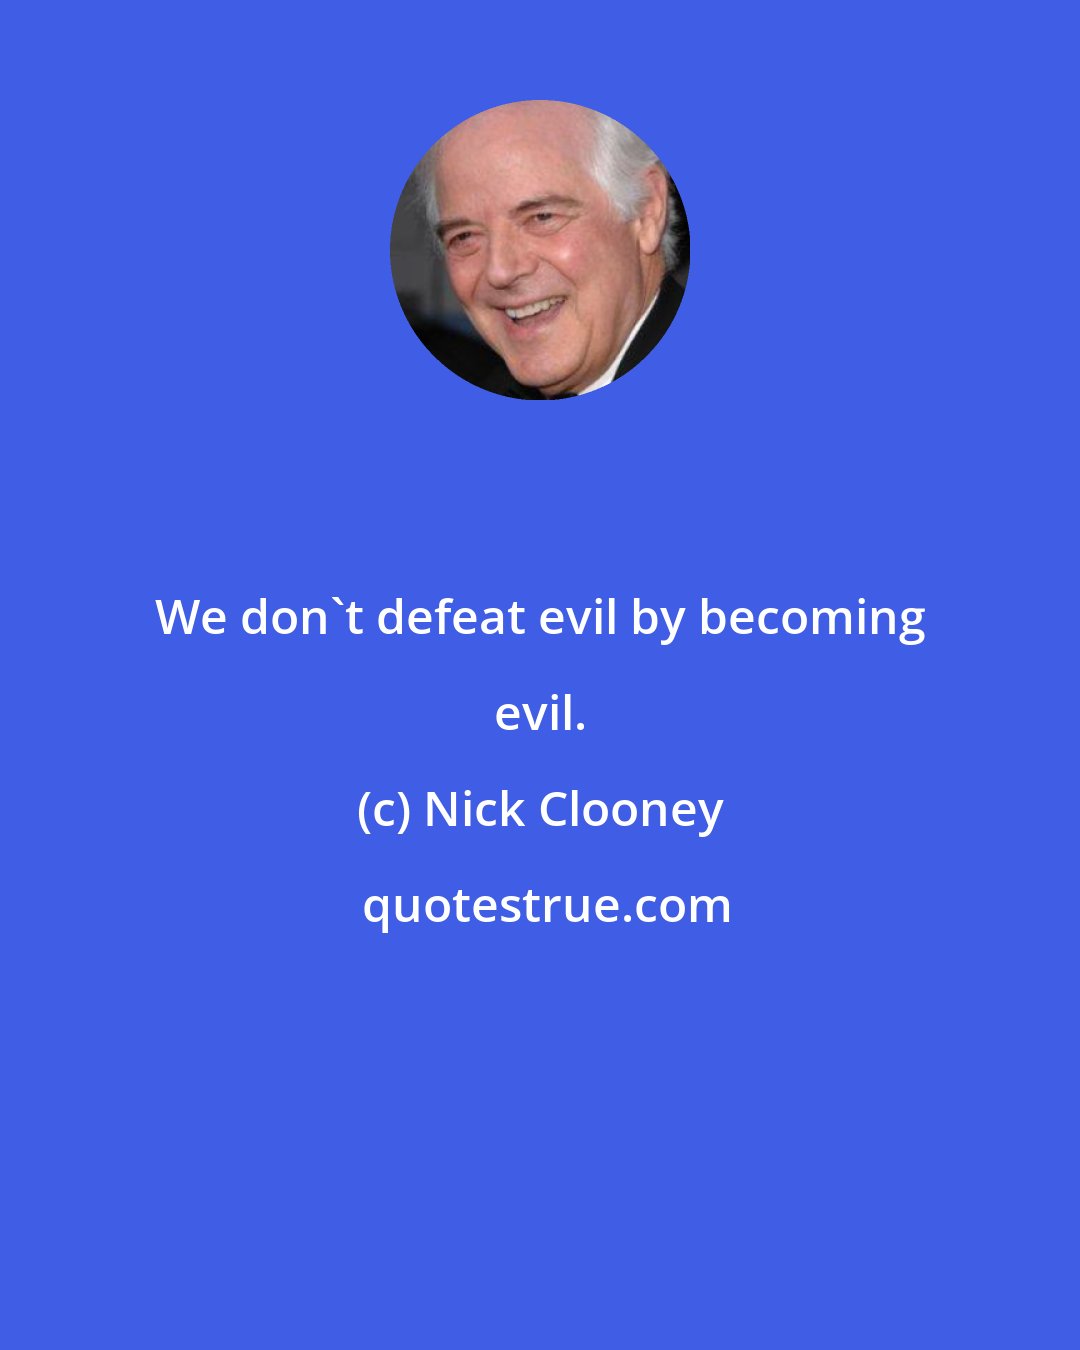 Nick Clooney: We don't defeat evil by becoming evil.